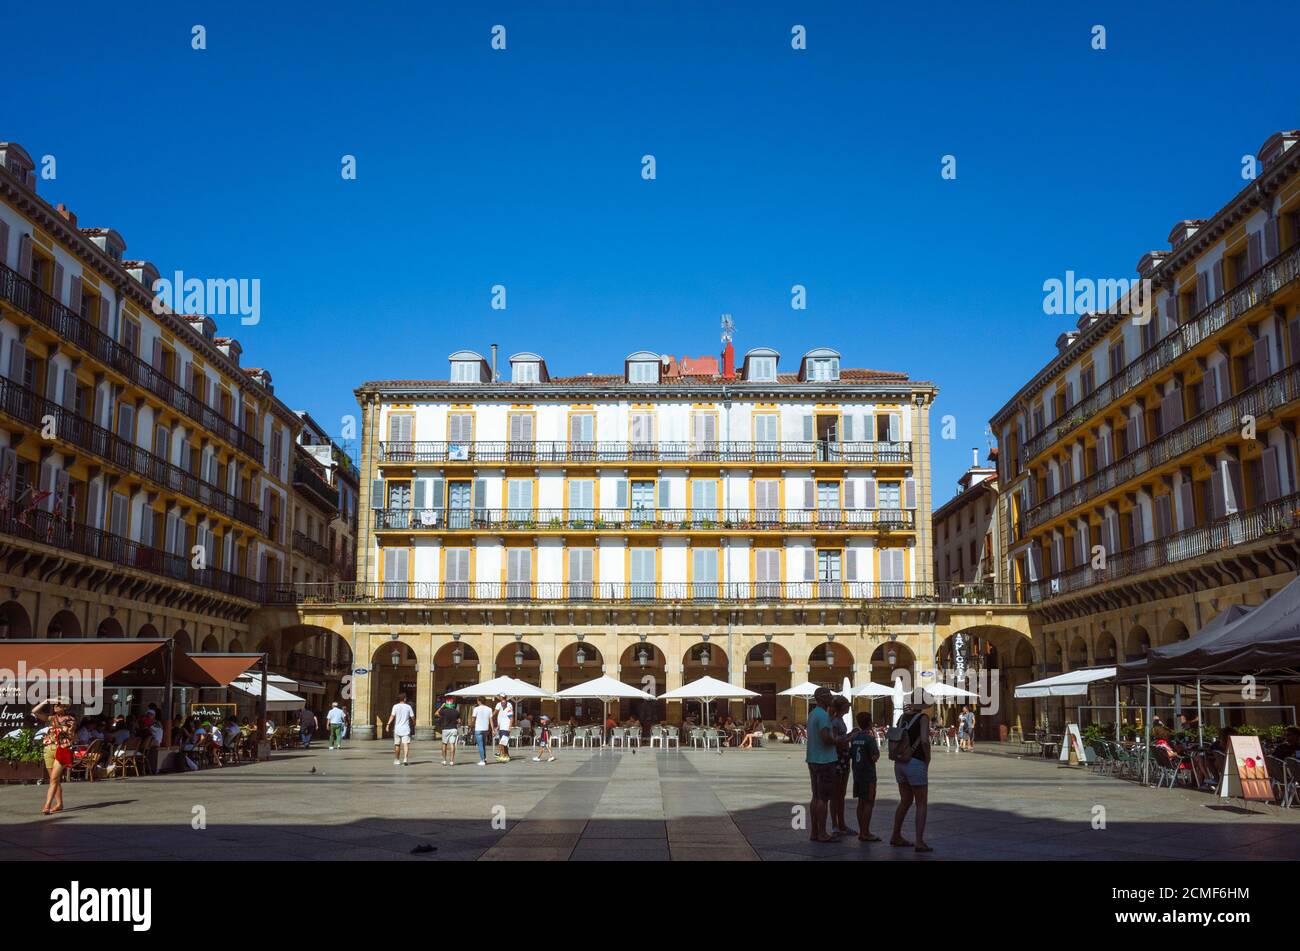 Donostia, Gipuzkoa, Basque Country, Spain - July 12th, 2019 : Passersby at Constitution Square in the Alde Zaharra old town. Stock Photo